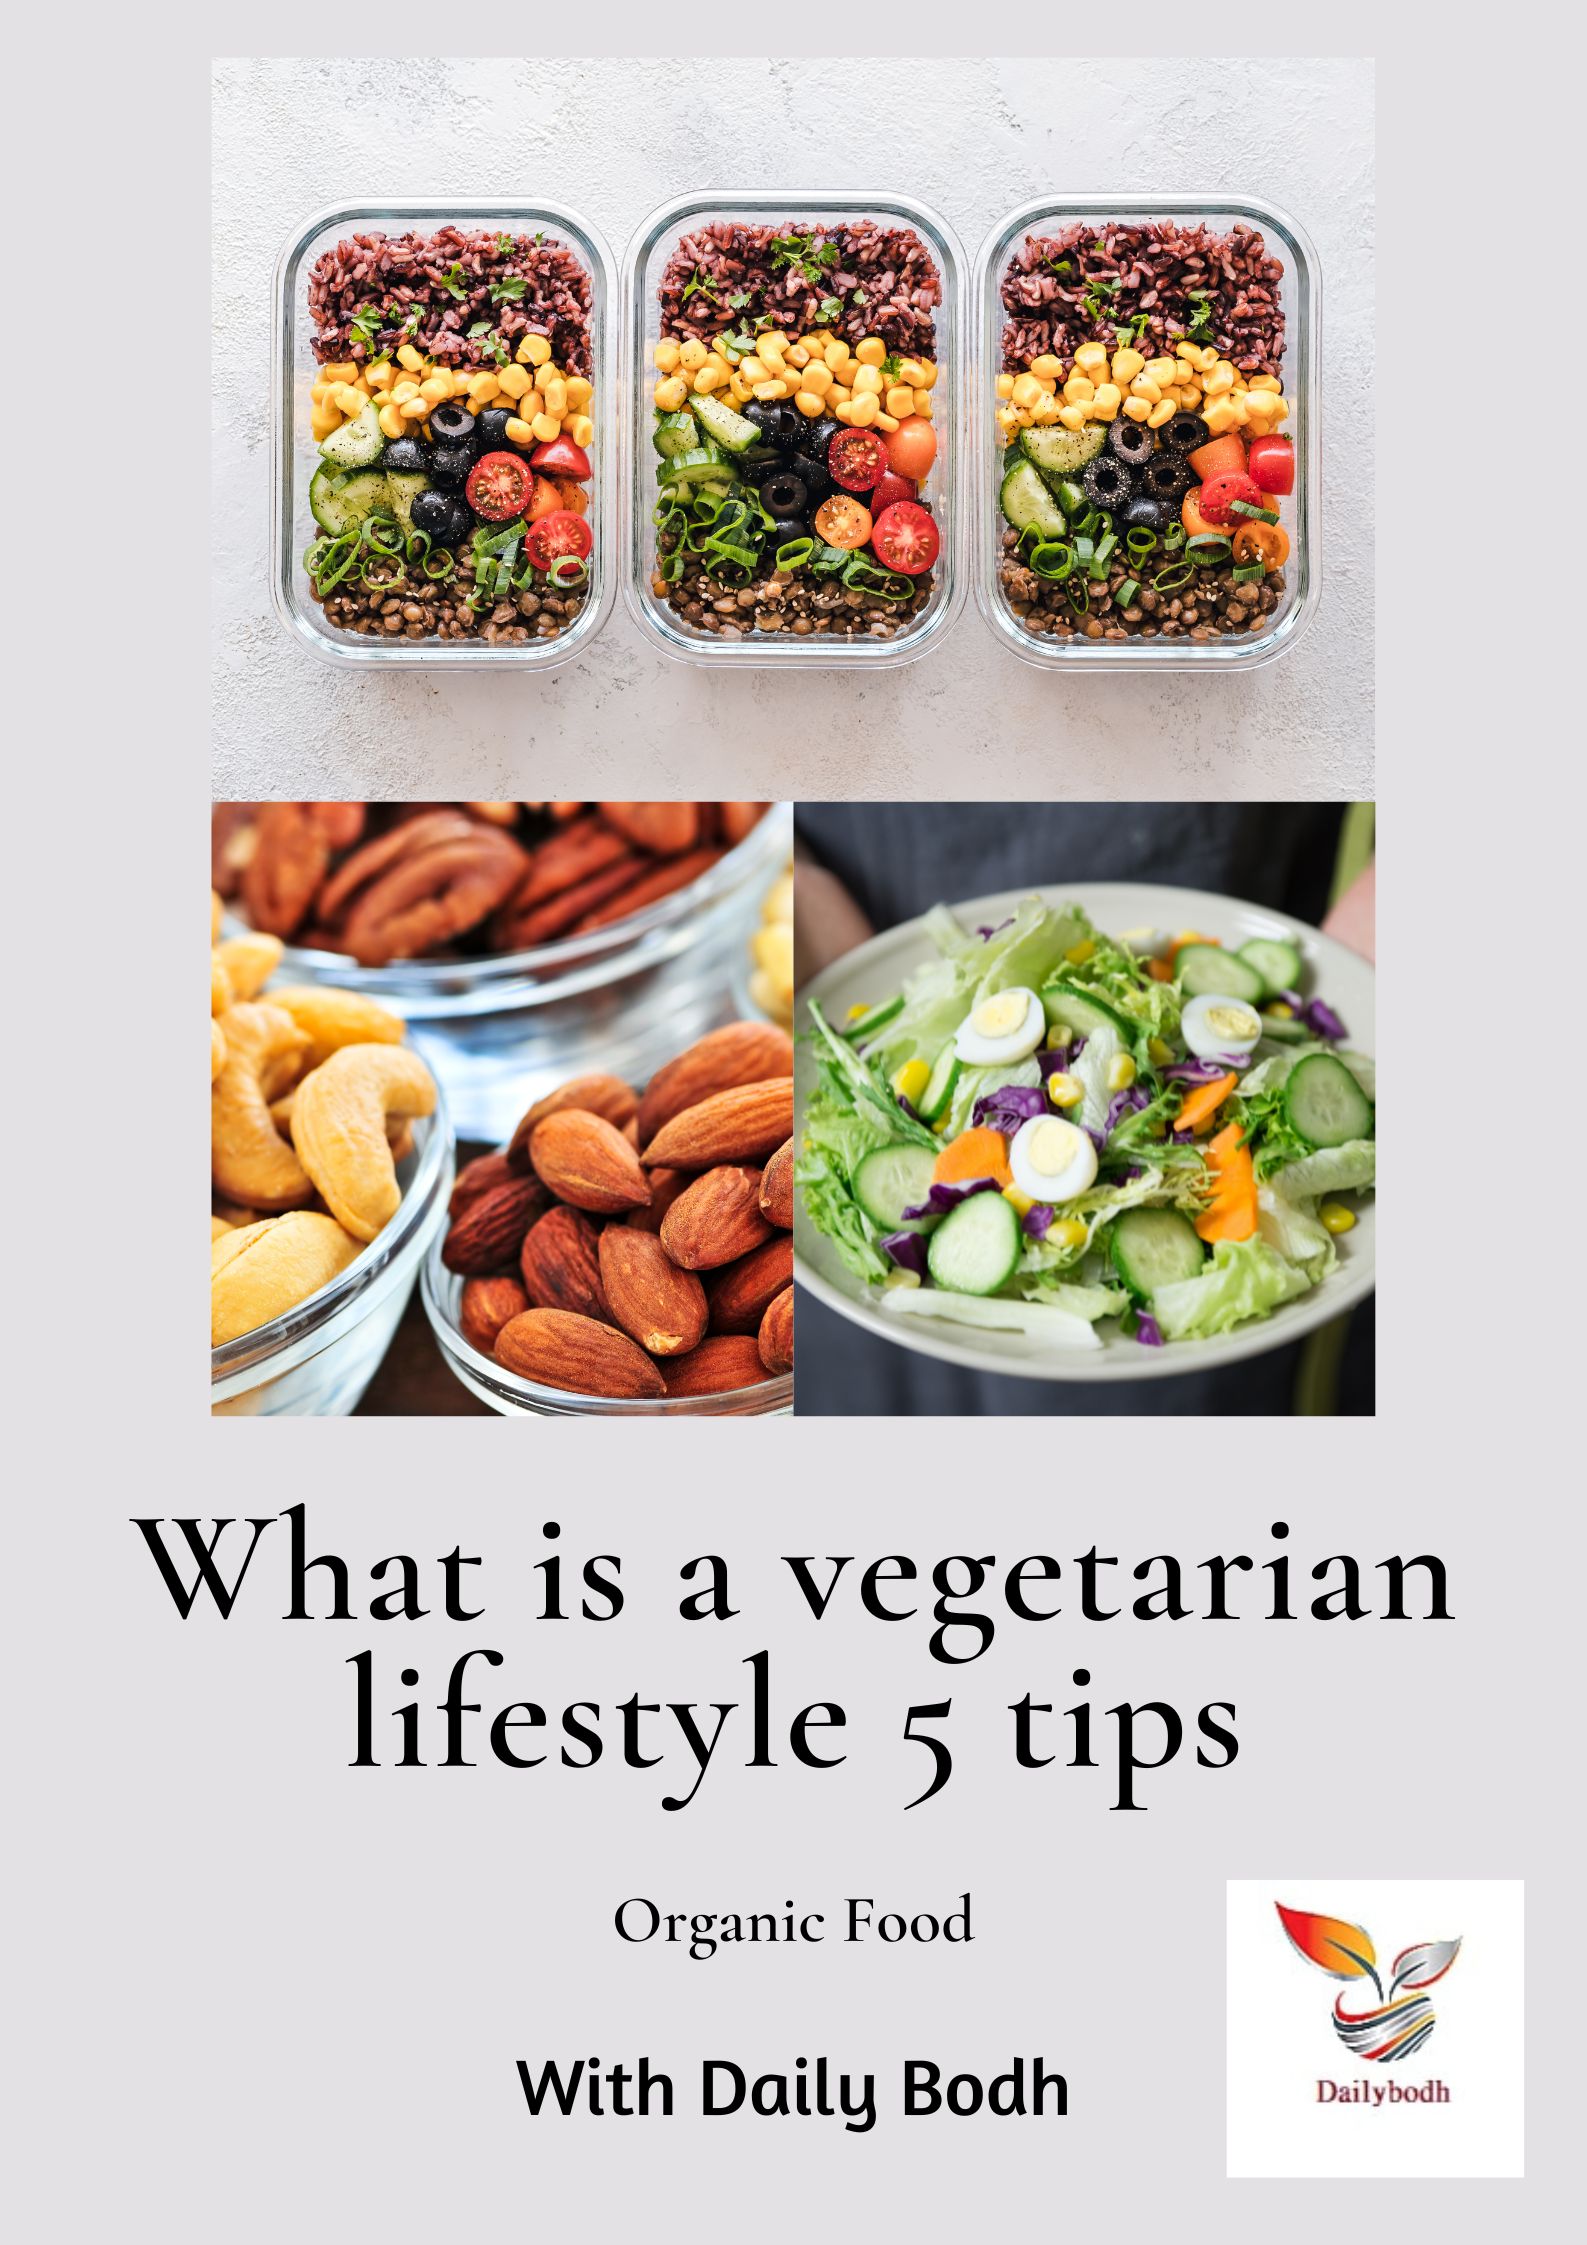 What is a vegetarian lifestyle